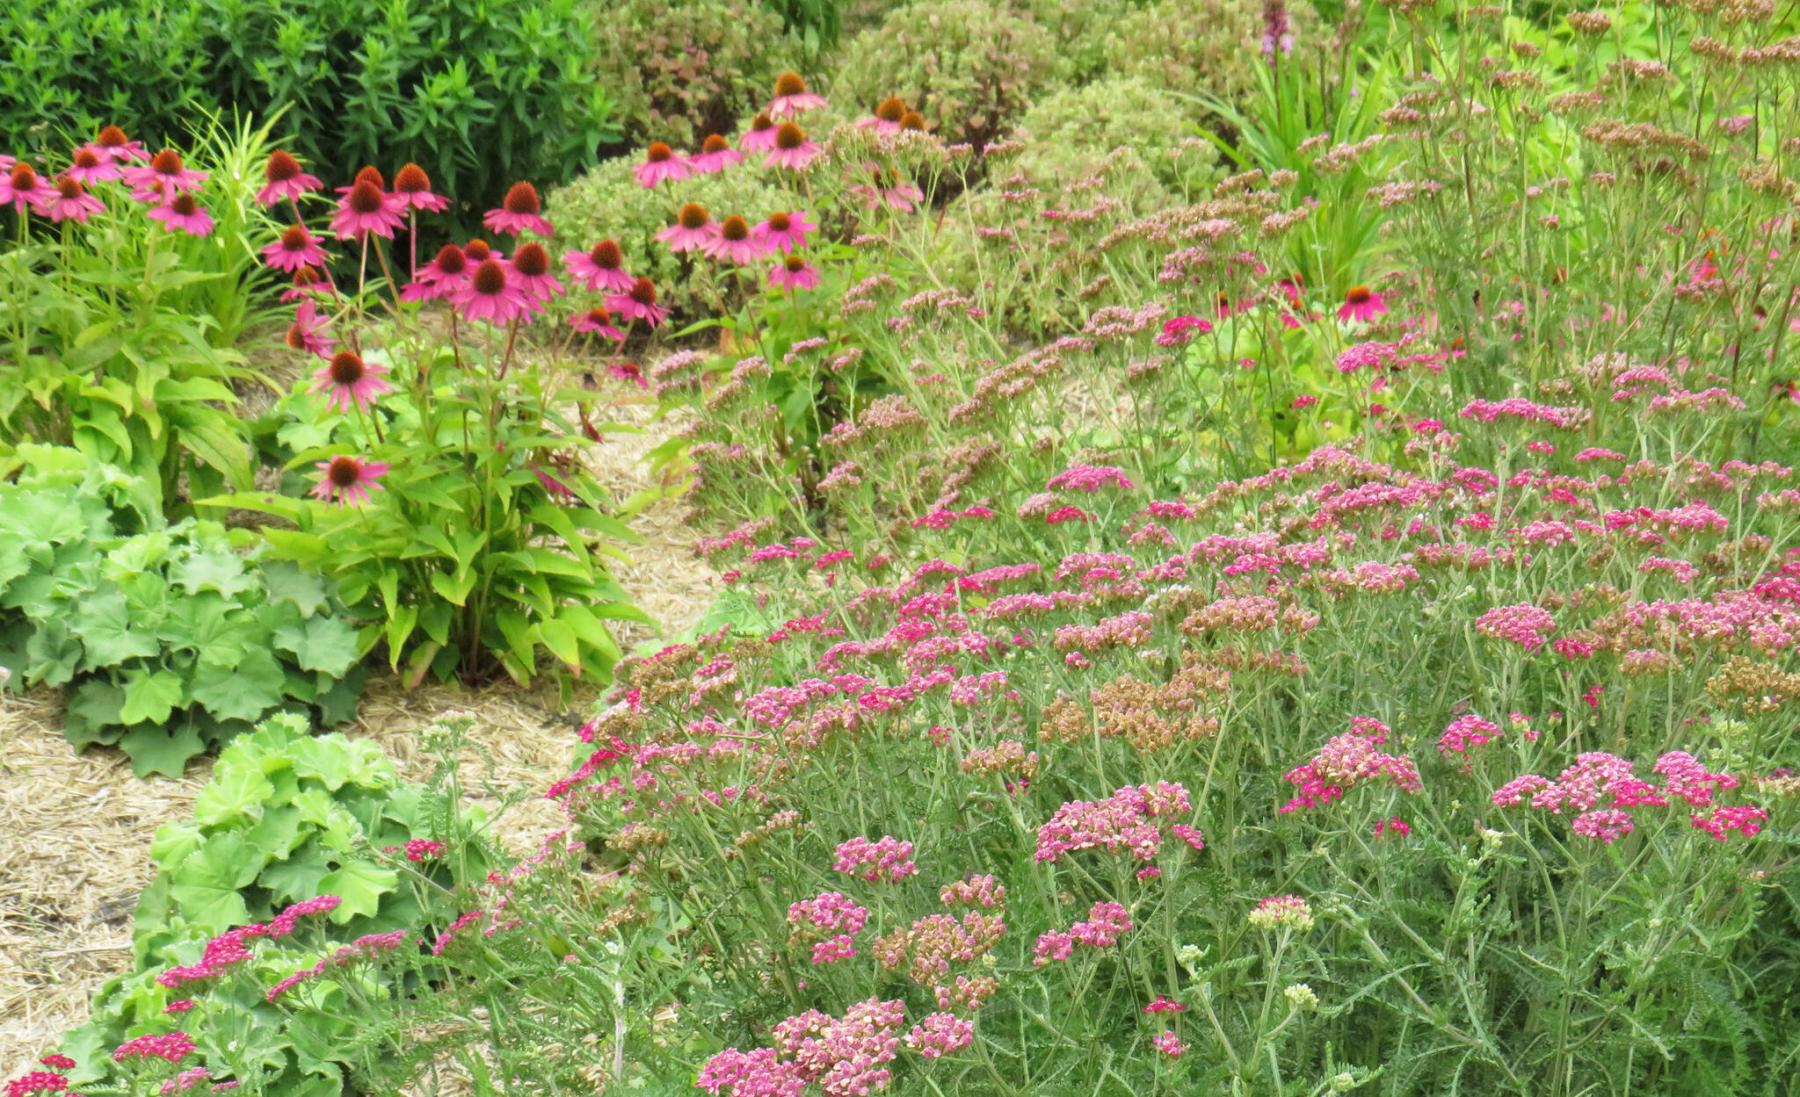 <p>Photos by Colleen Zacharias / Winnipeg Free Press </p><p>Some of the perennial favourites in the Seasonal Garden at Assiniboine Park: purple coneflower, yarrow, lady&rsquo;s mantle.</p>